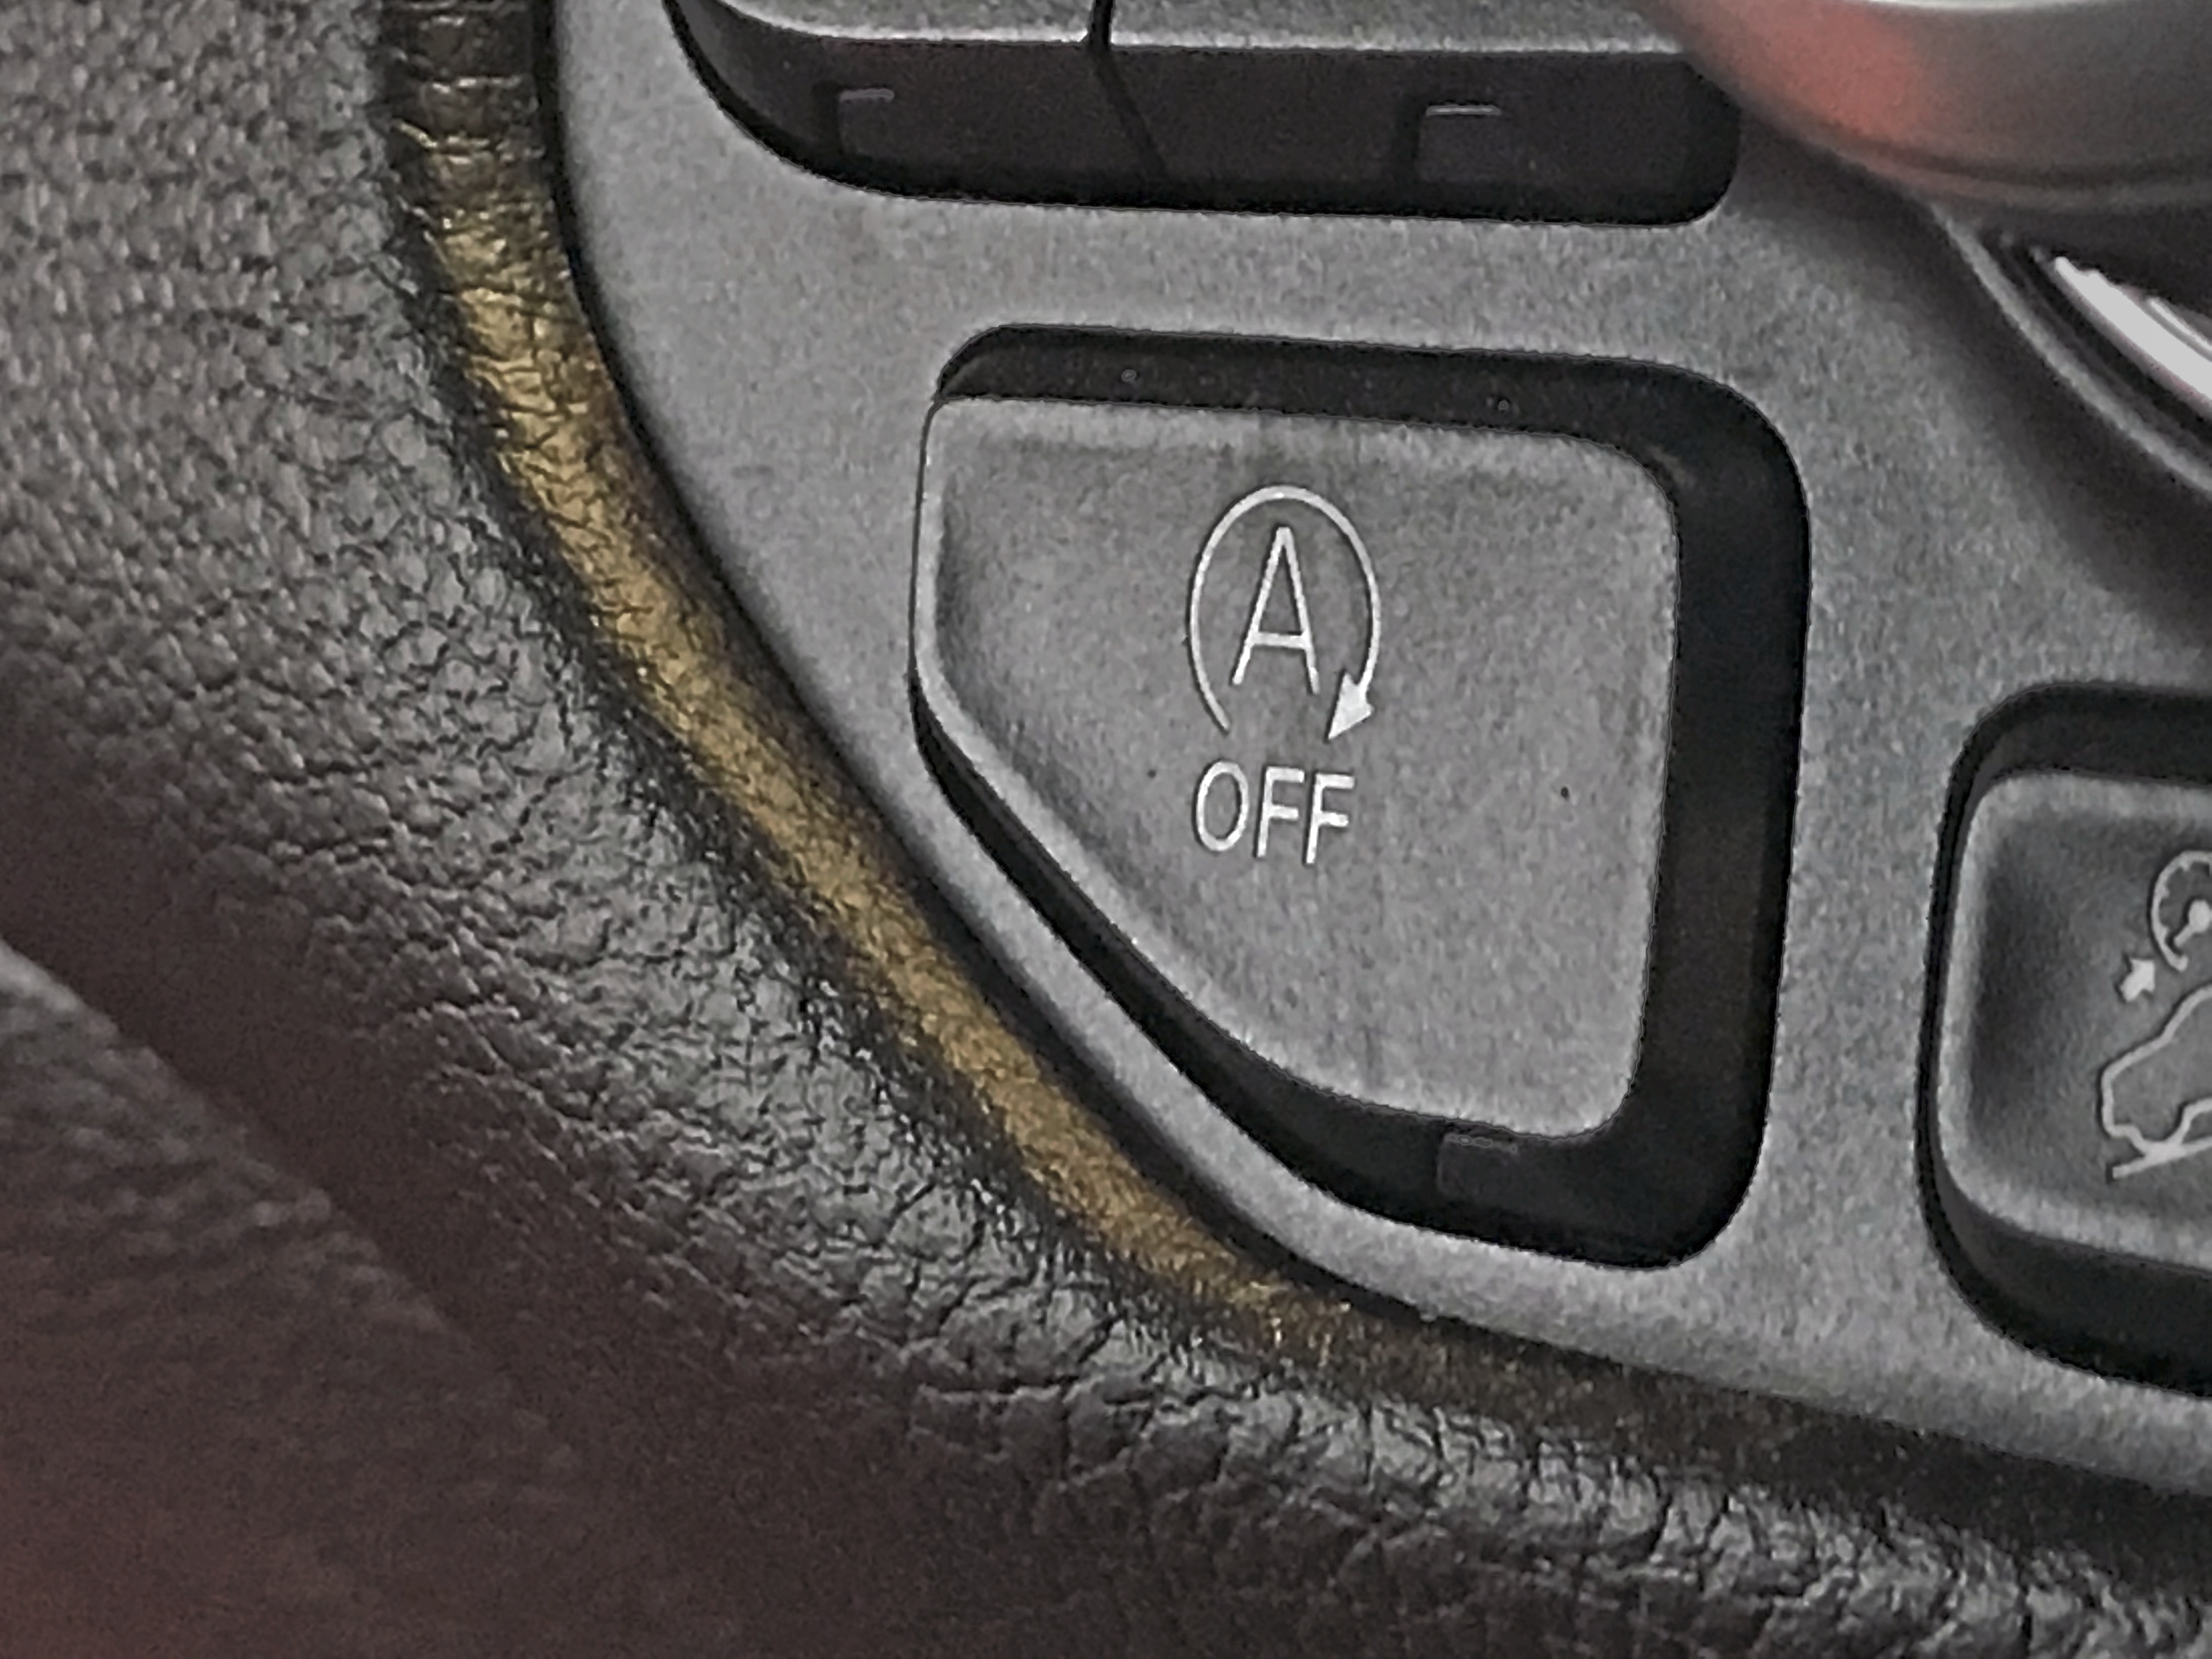 Ask TFL: Why Don't Manufacturers Let You Permanently Shut Off Auto